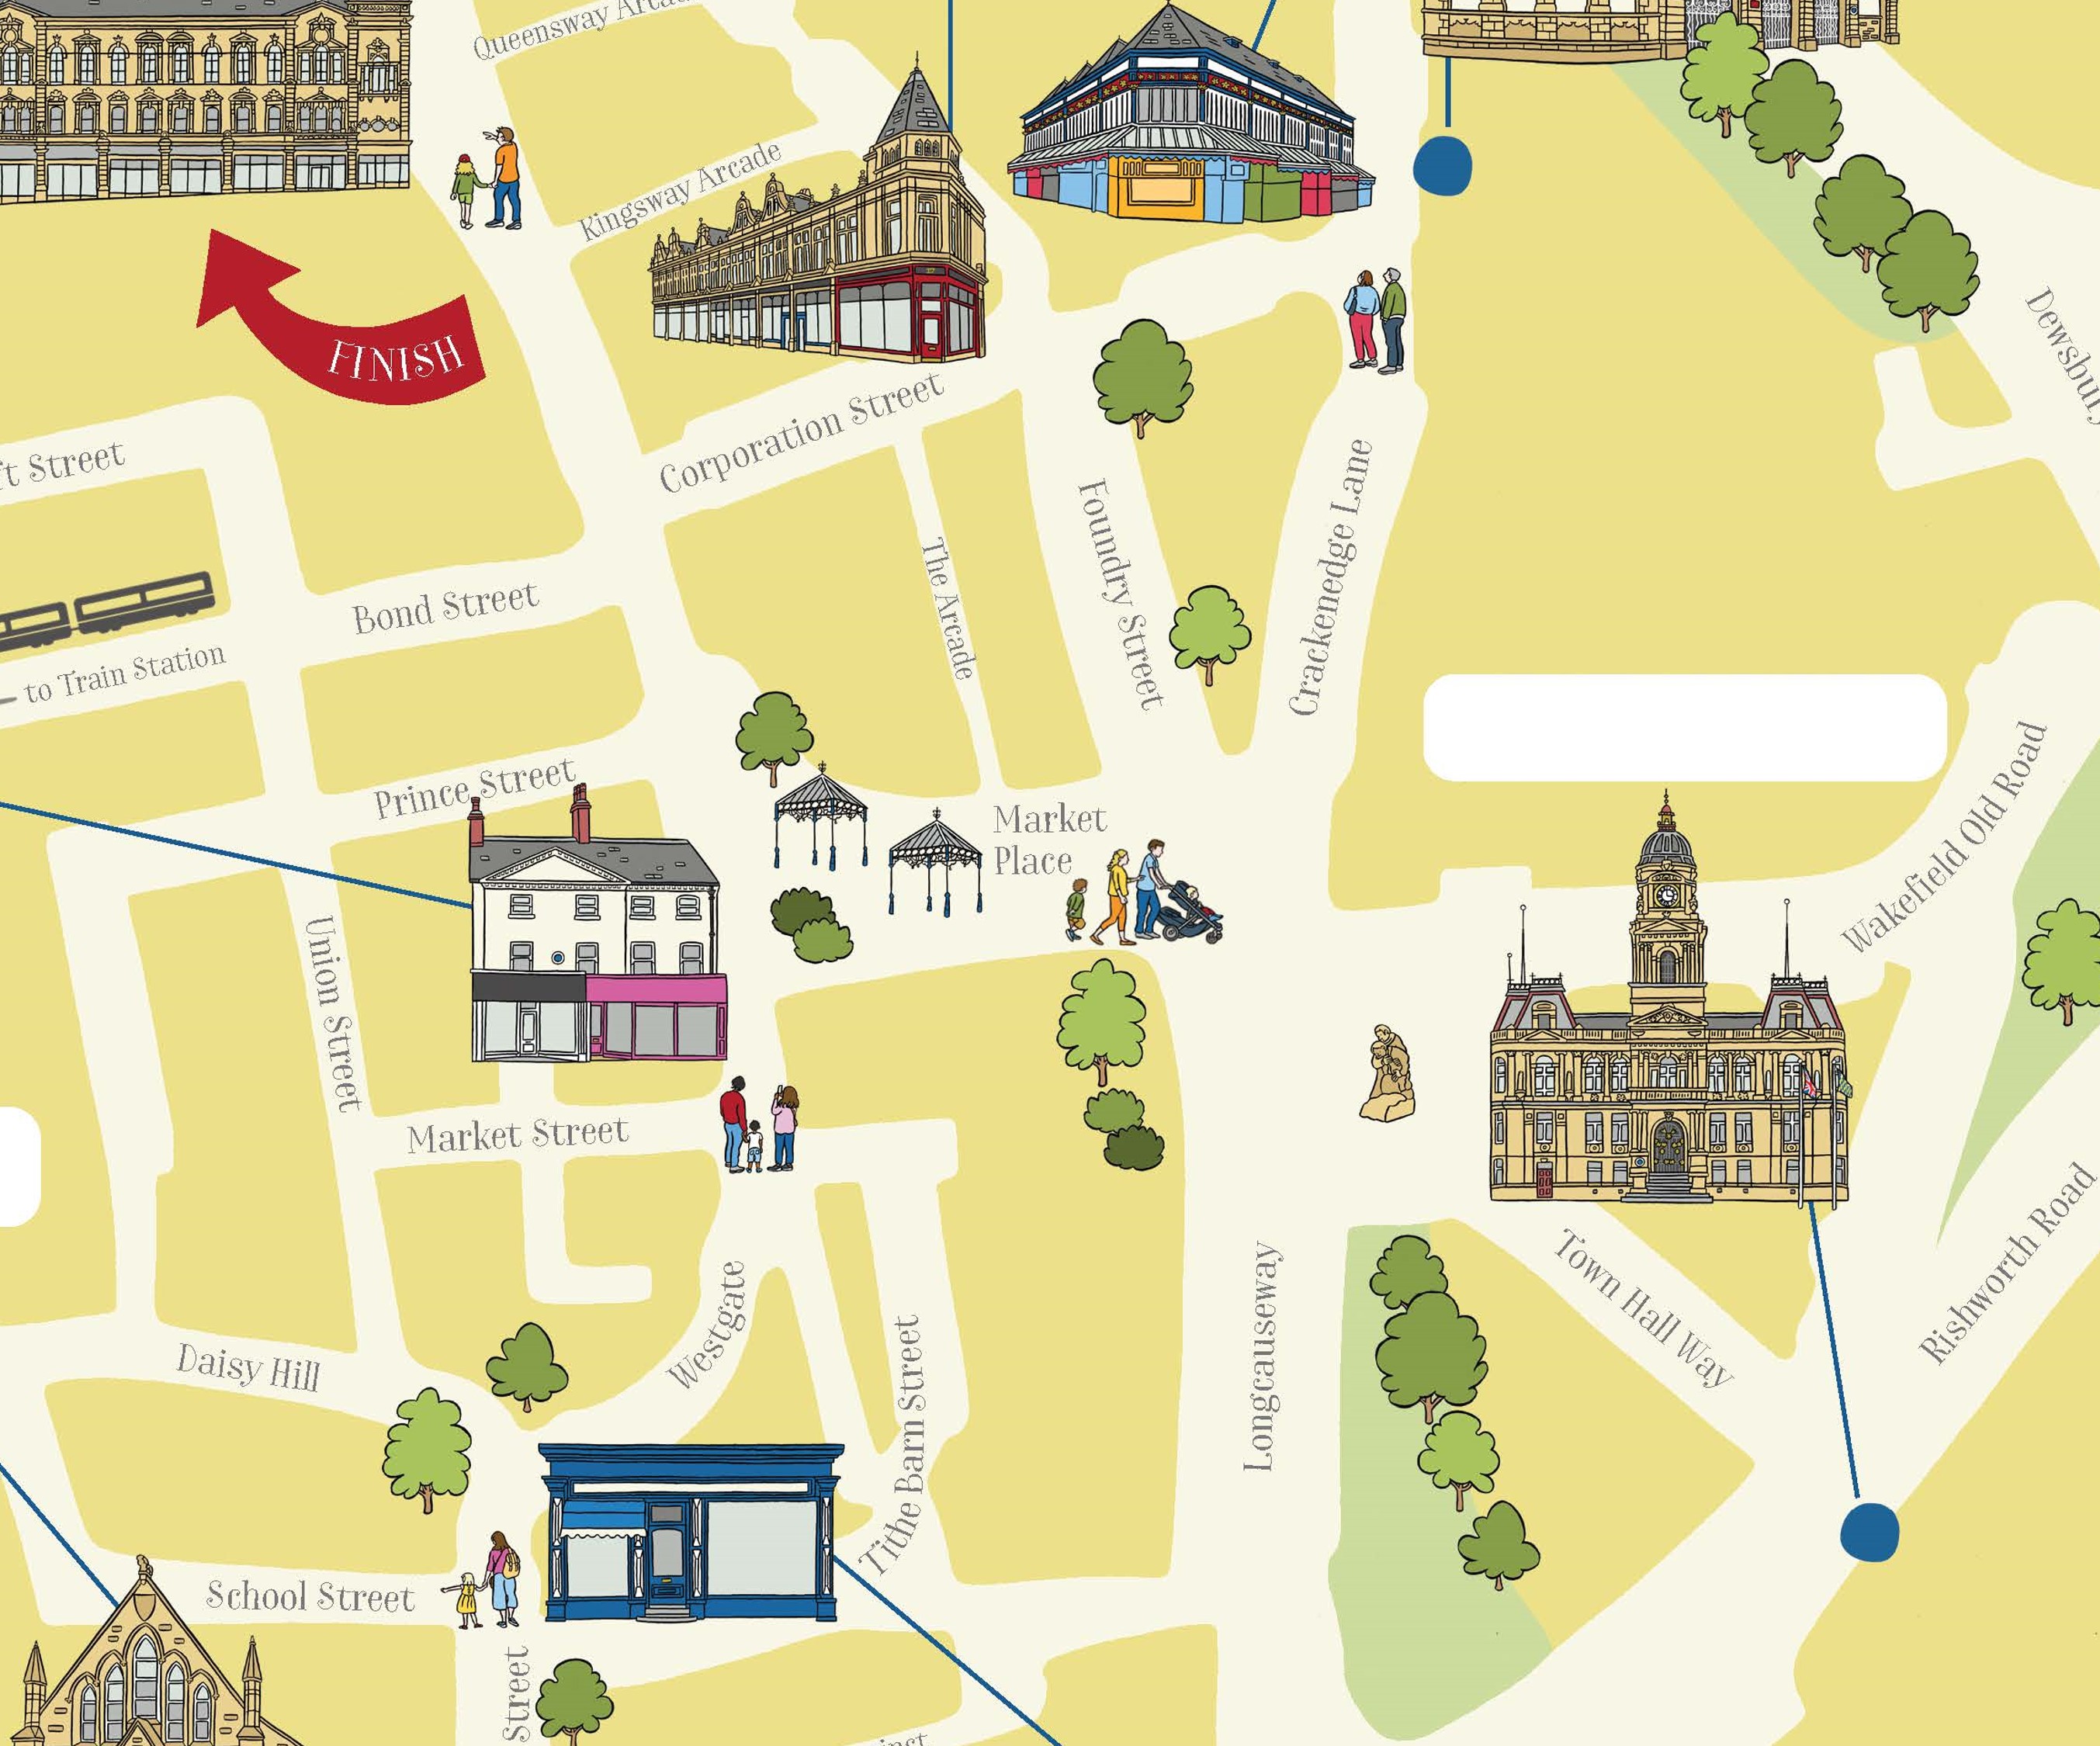 A trail map graphic with street names and cartoon renderings of key heritage buildings in Dewsbury